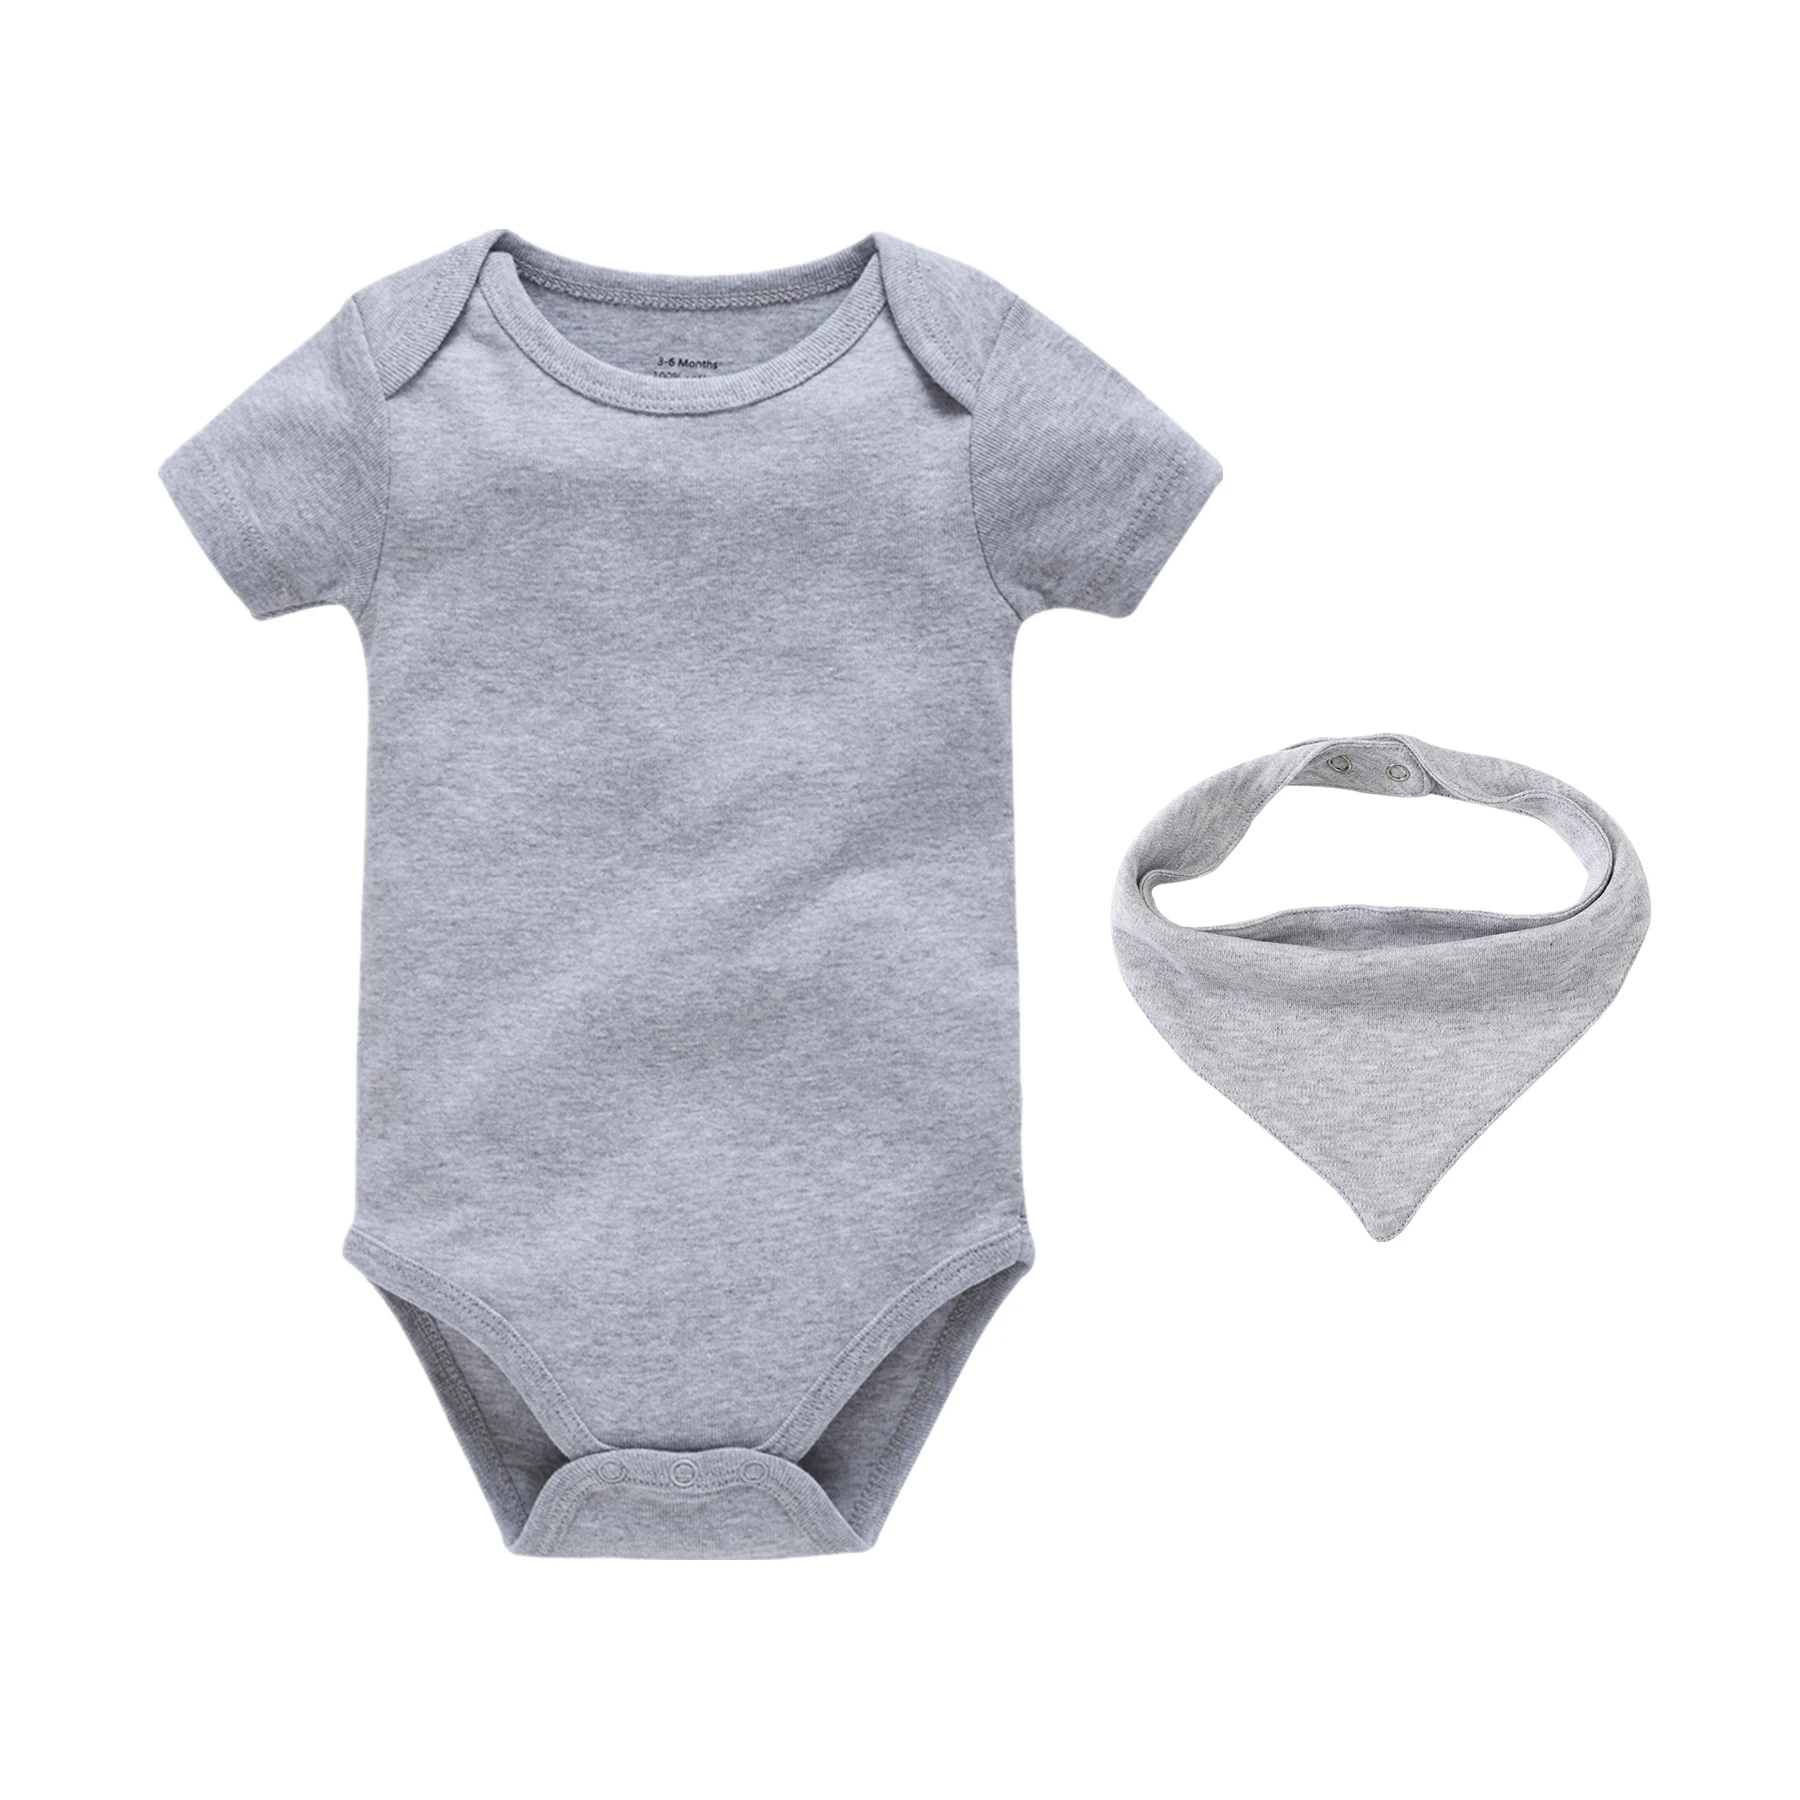 

Unisex Bebes Filles 0-24M Baby Rompers Cotton Long Sleeve Girls Jumpsuit Infant Boys Jumper Onesie Solid Toddler Baby Clothing